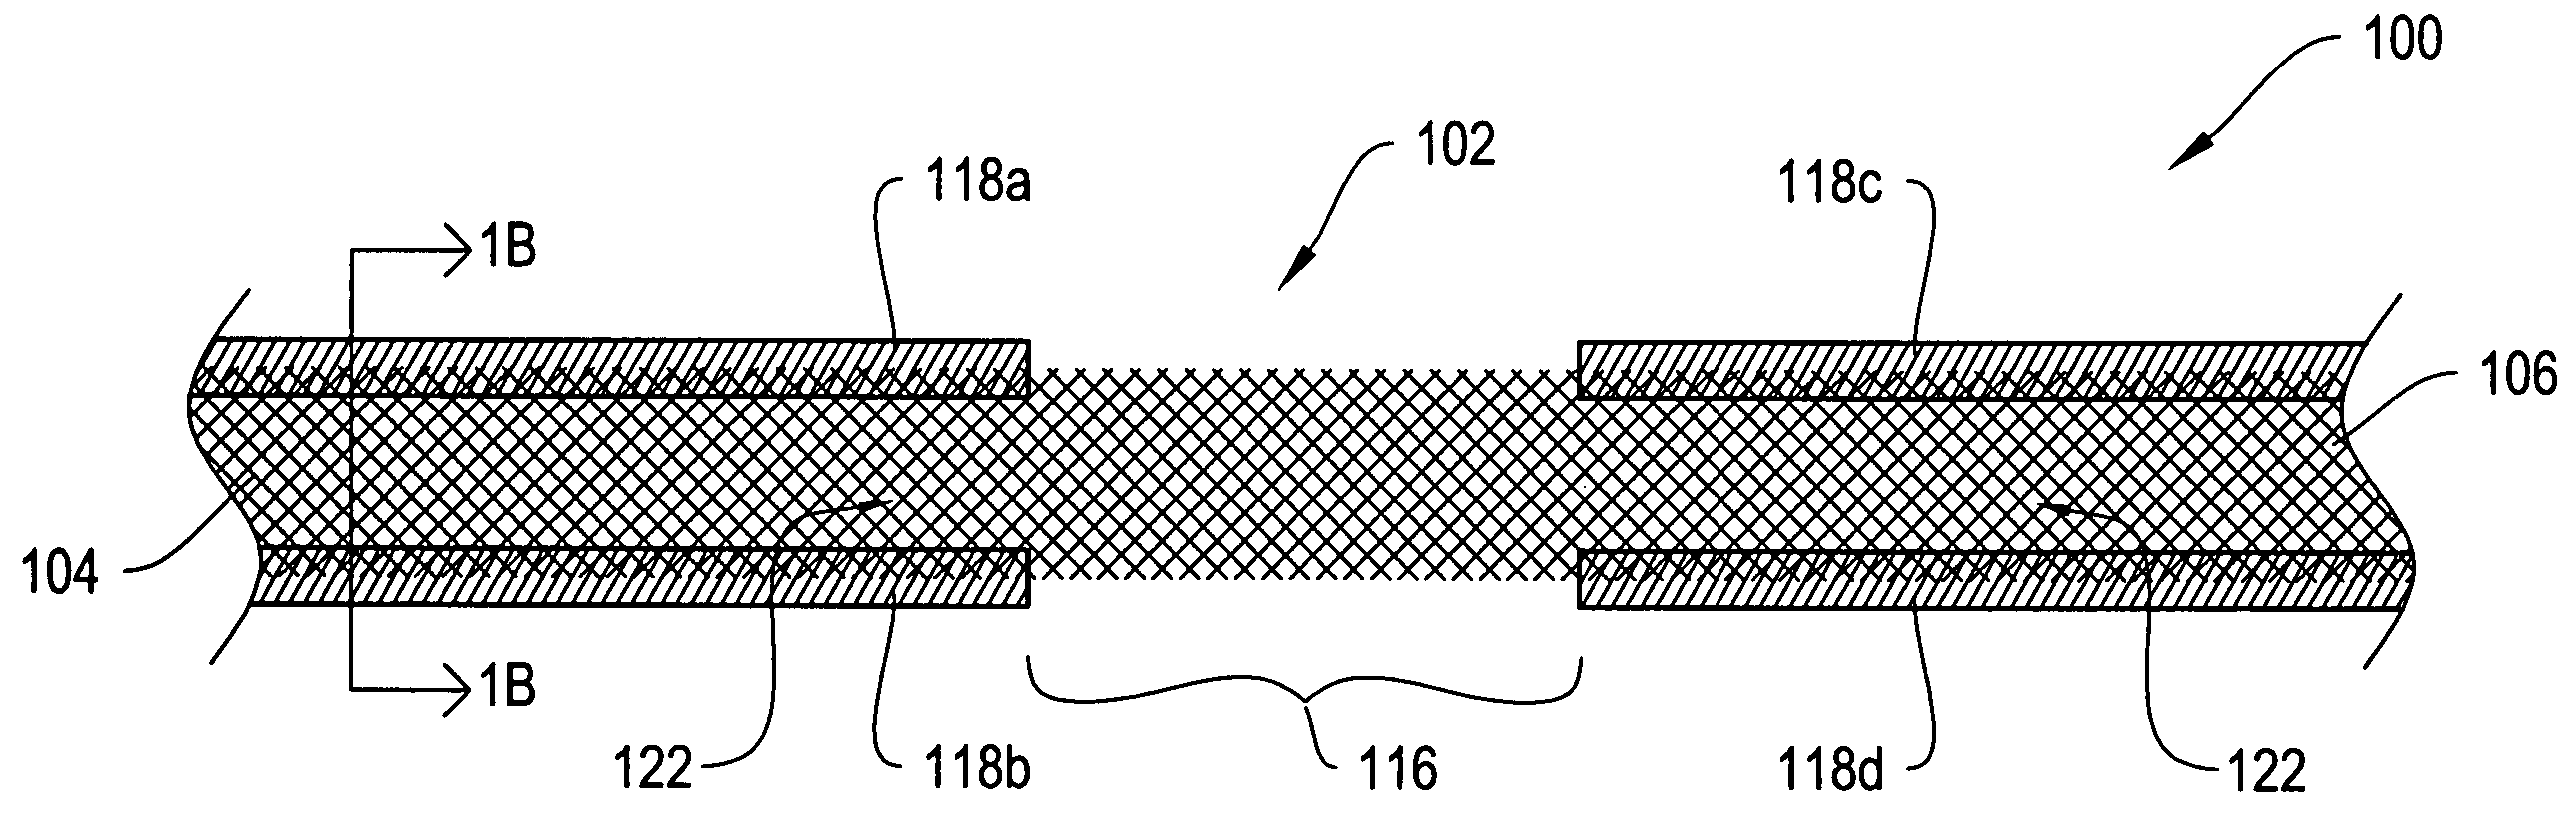 Dissolvable protective treatment for an implantable supportive sling